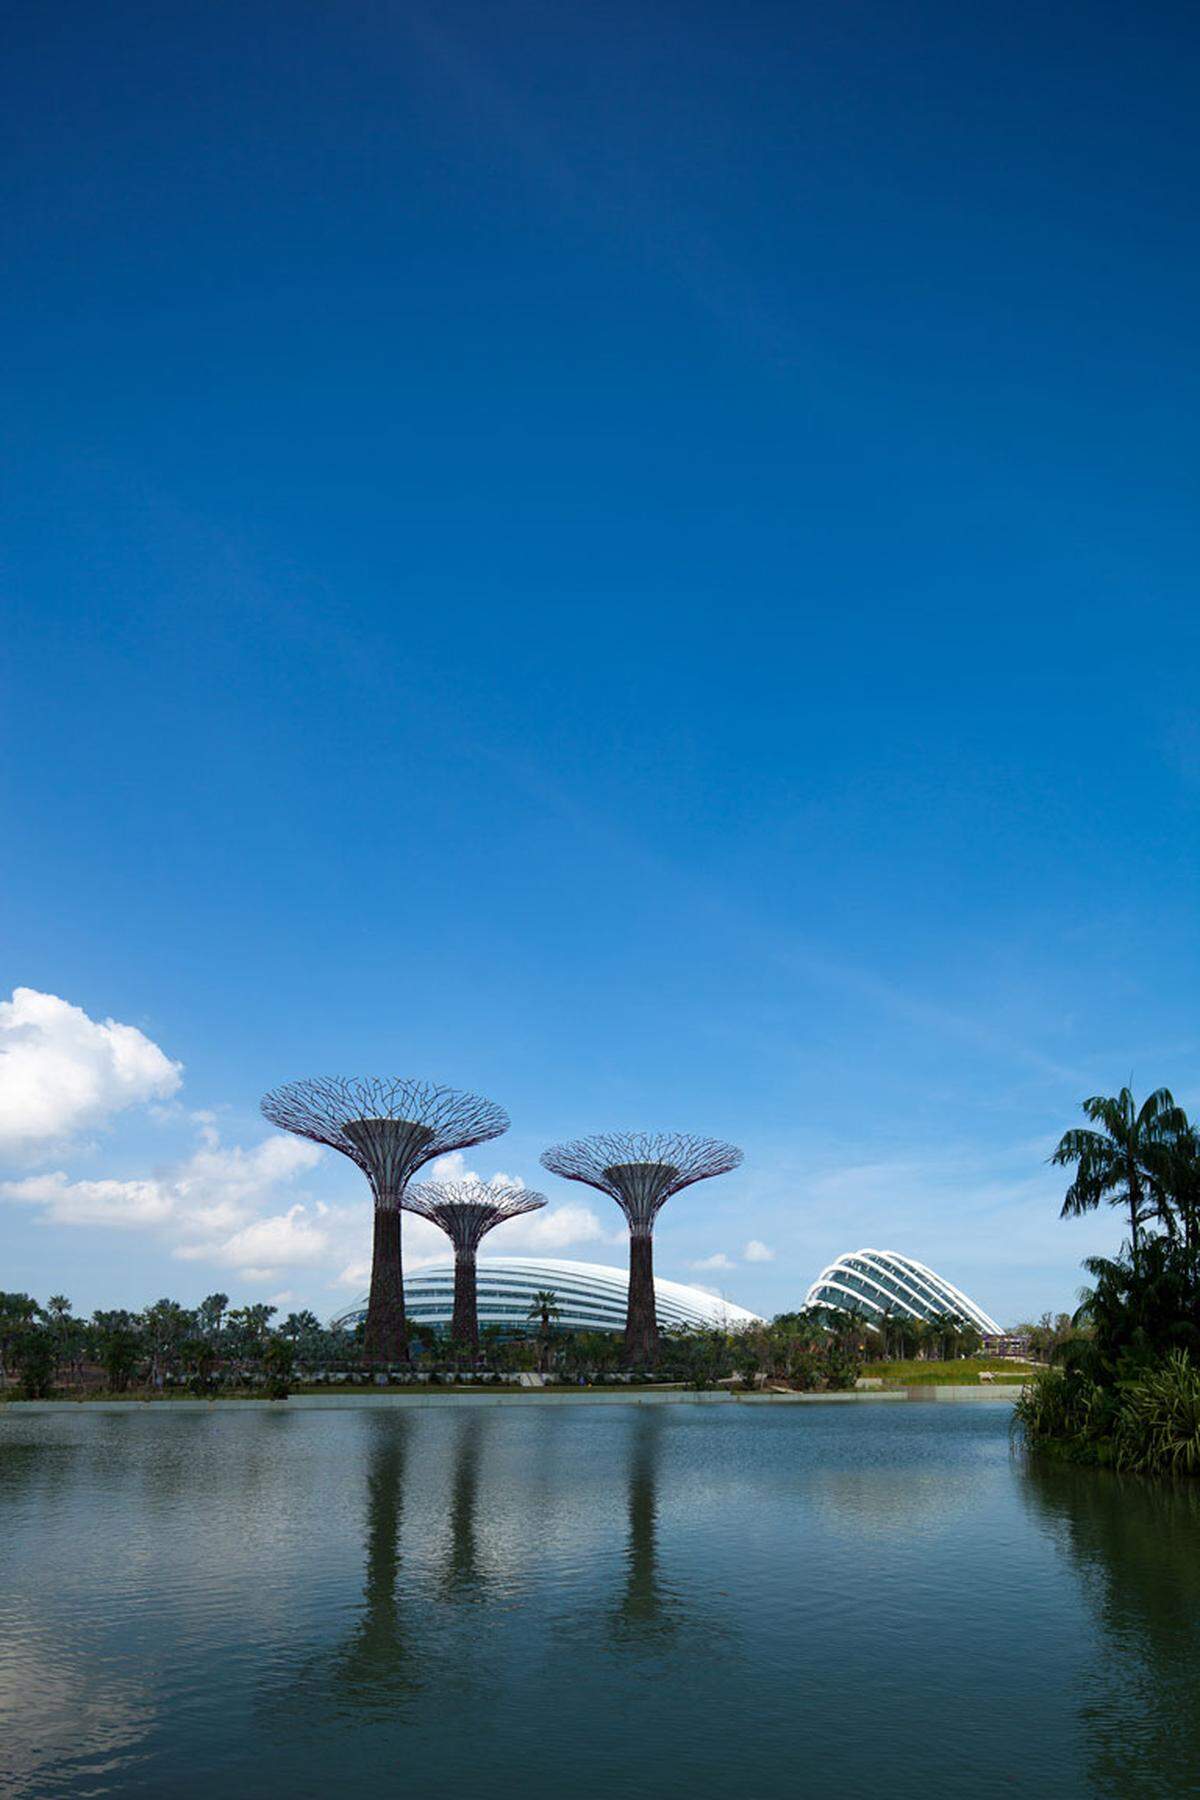 Special Jury Award: Gardens by the Bay, Architekt: Grant Associates and Wilkinson Eyre Architects, Developer: National Parks Board Singapore